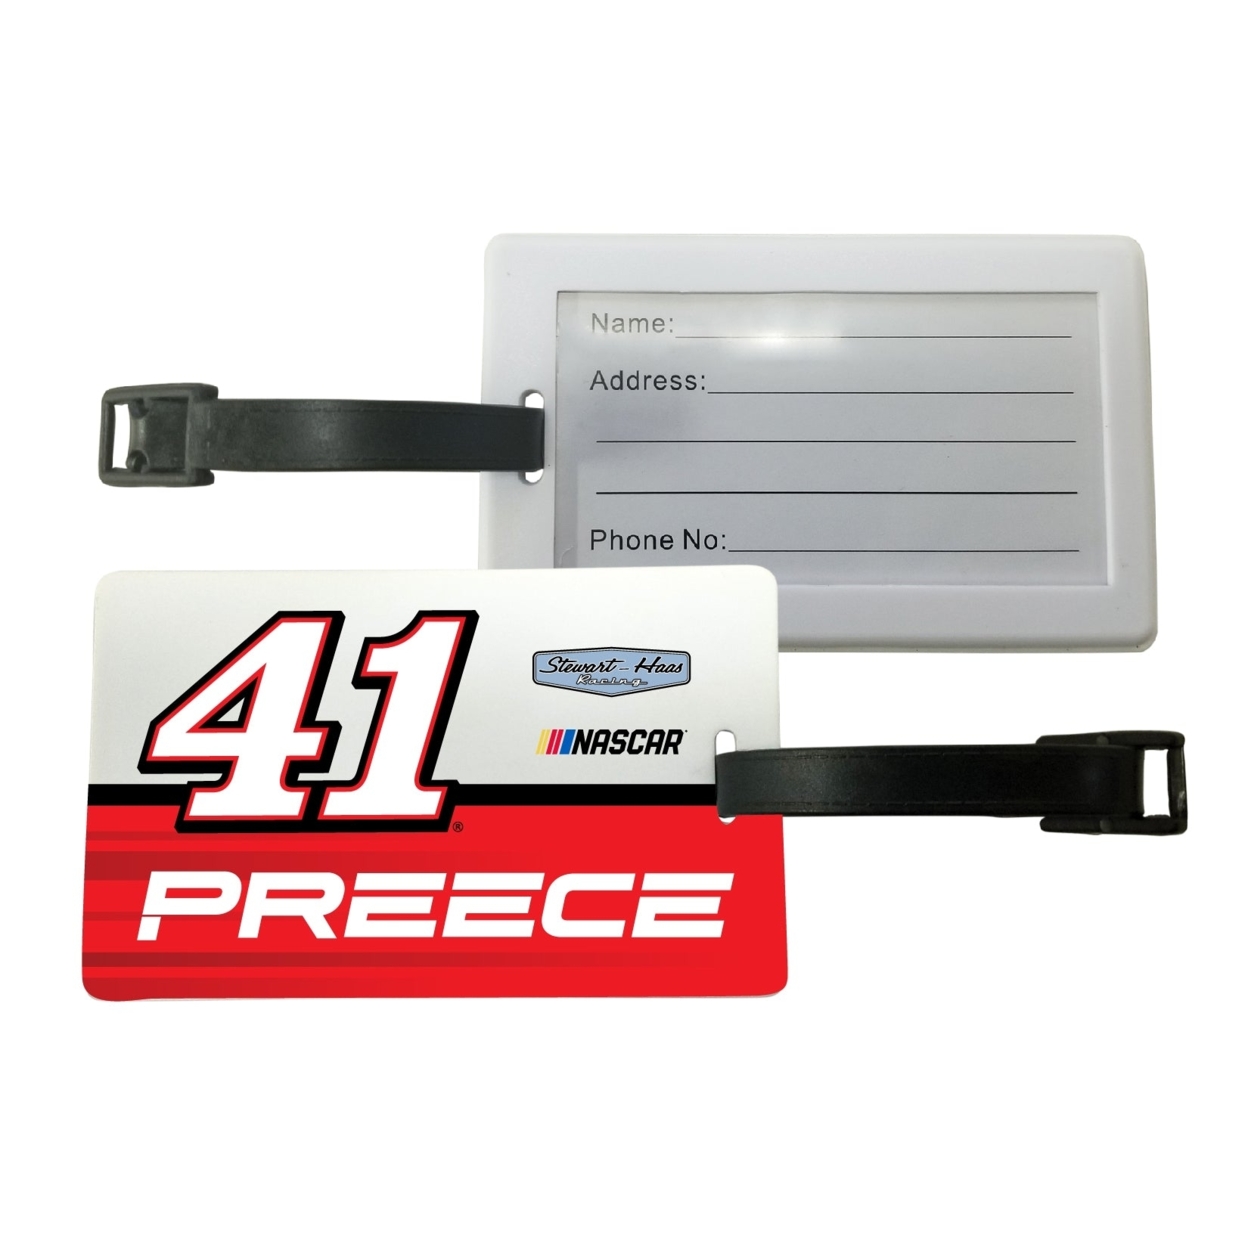 #41 Ryan Preece Officially Licensed Luggage Tag